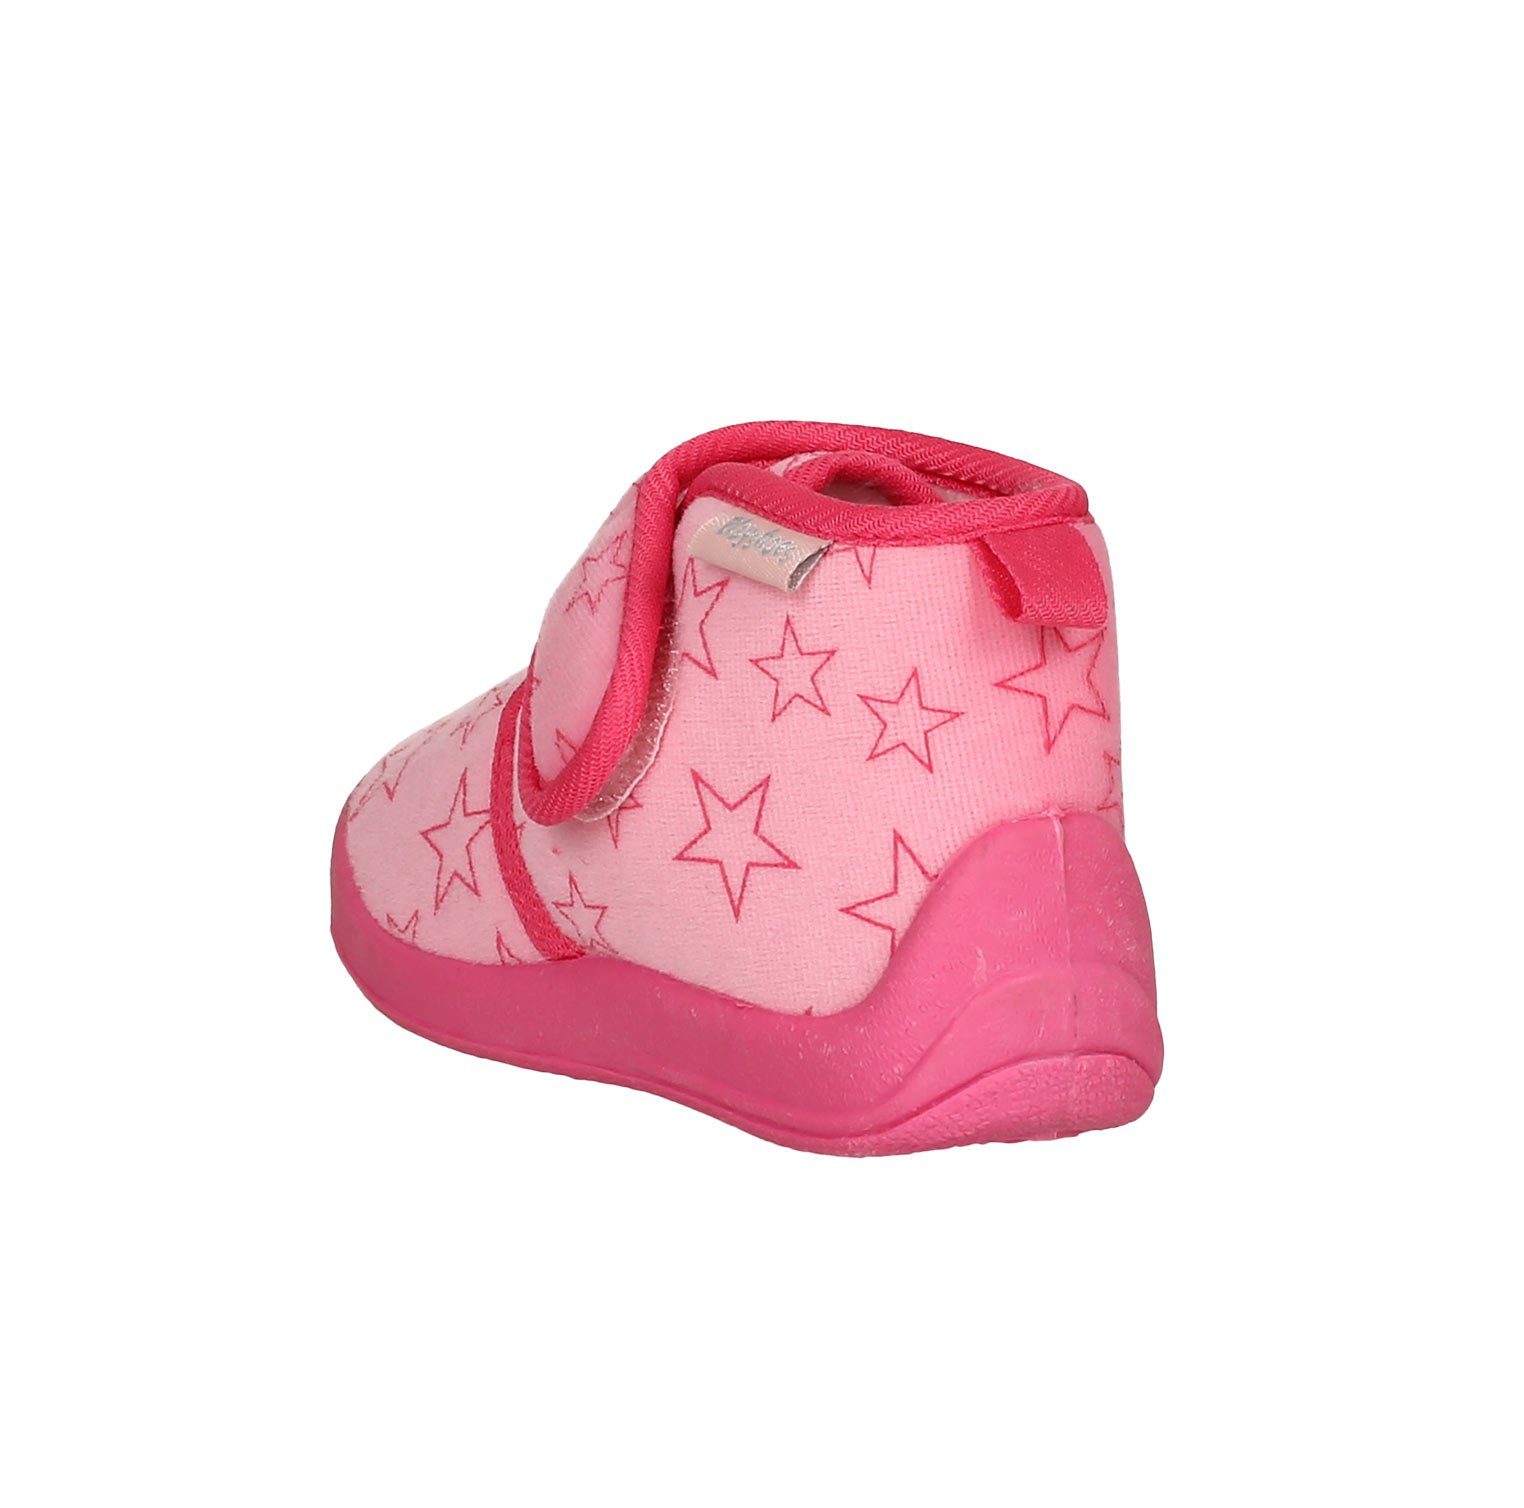 Playshoes Hausschuh Pastell Hausschuh Rosa